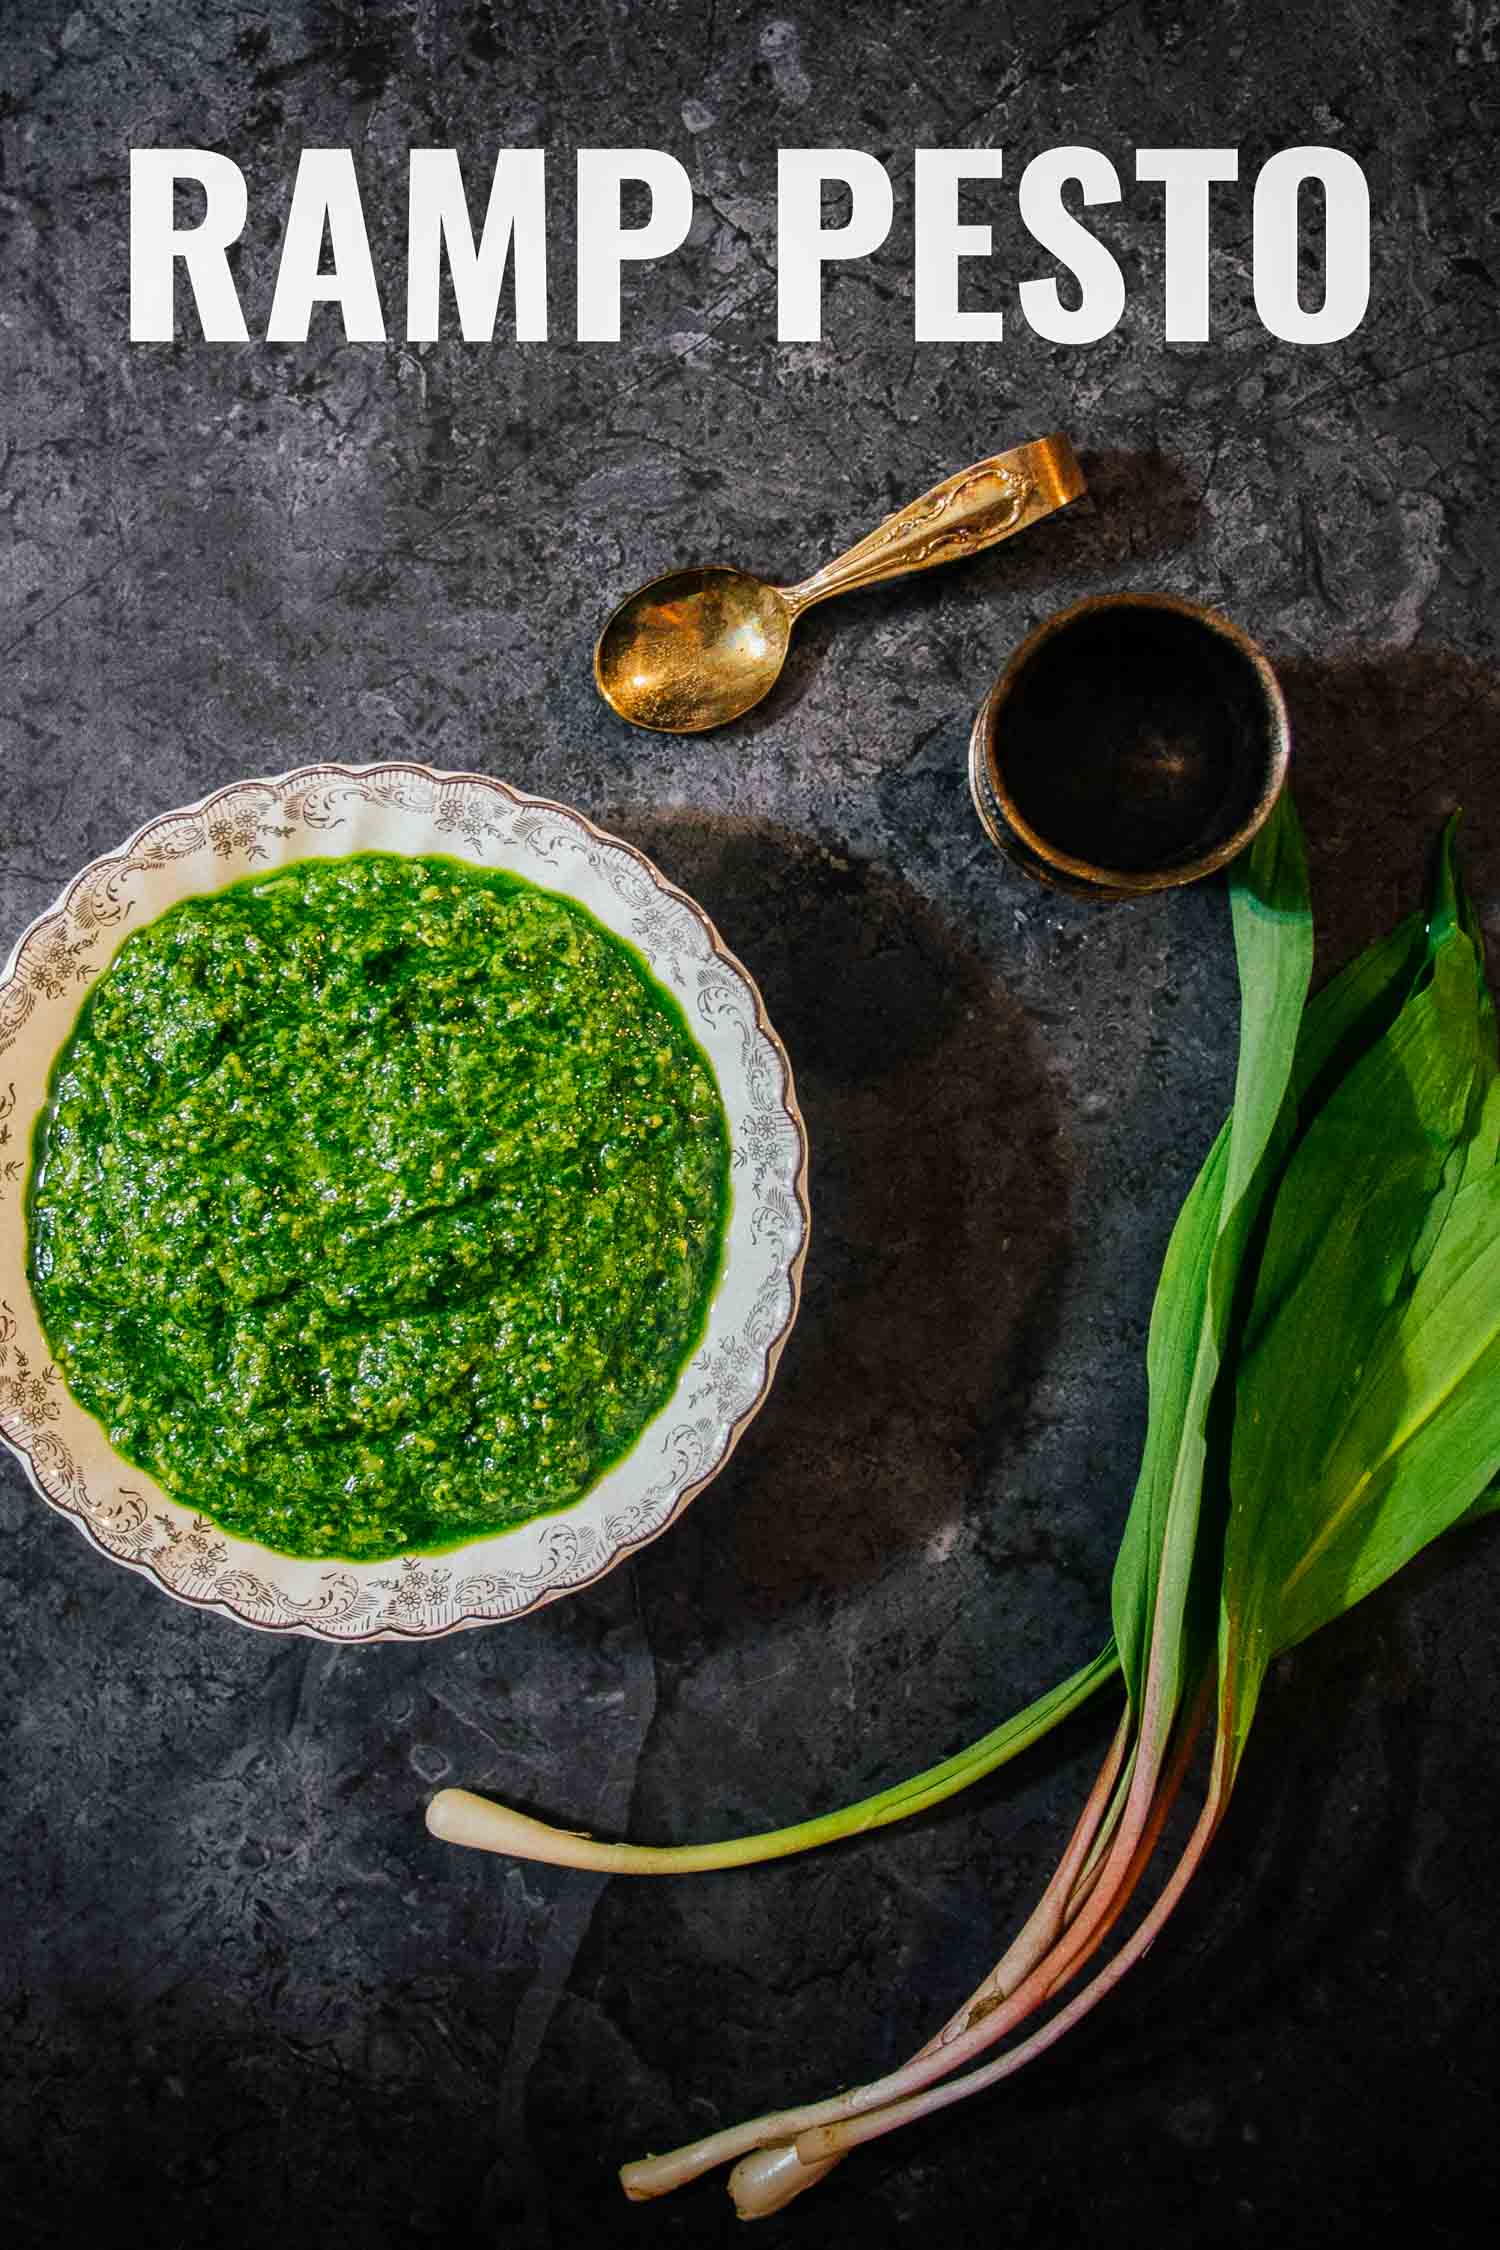 Ramps also known as wild leeks with ramp pesto and a spoon on a dark background.